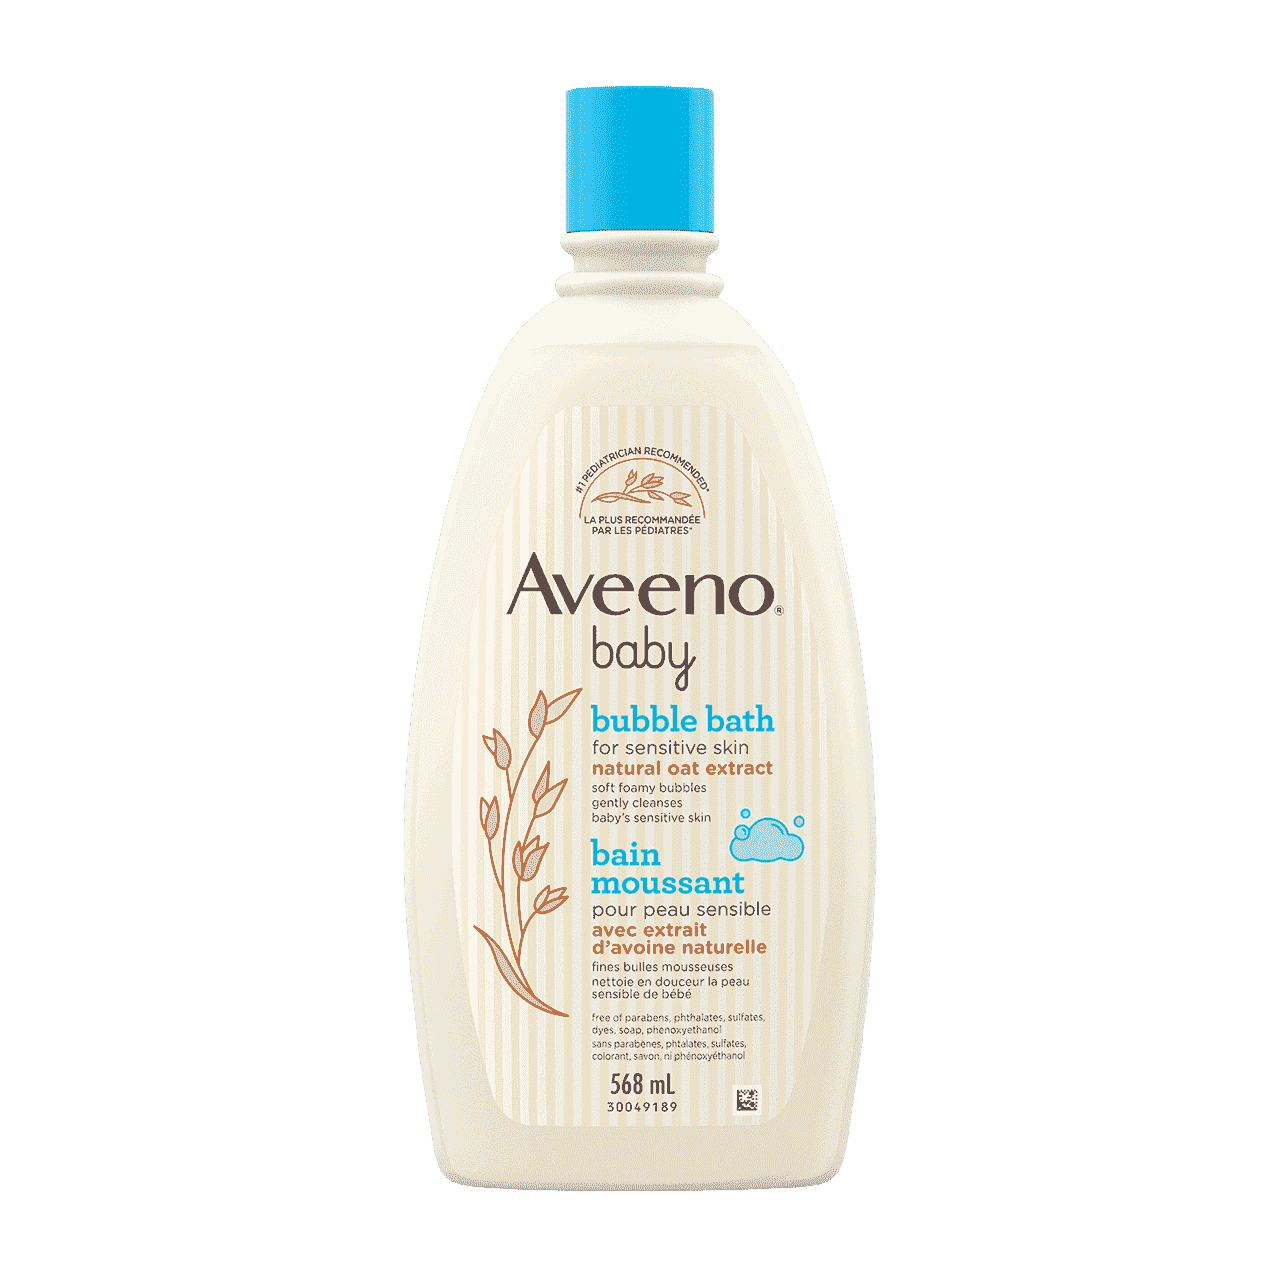 AVEENO® Baby Bubble Bath for Sensitive Skin with natural oat extract, 568ml  bottle